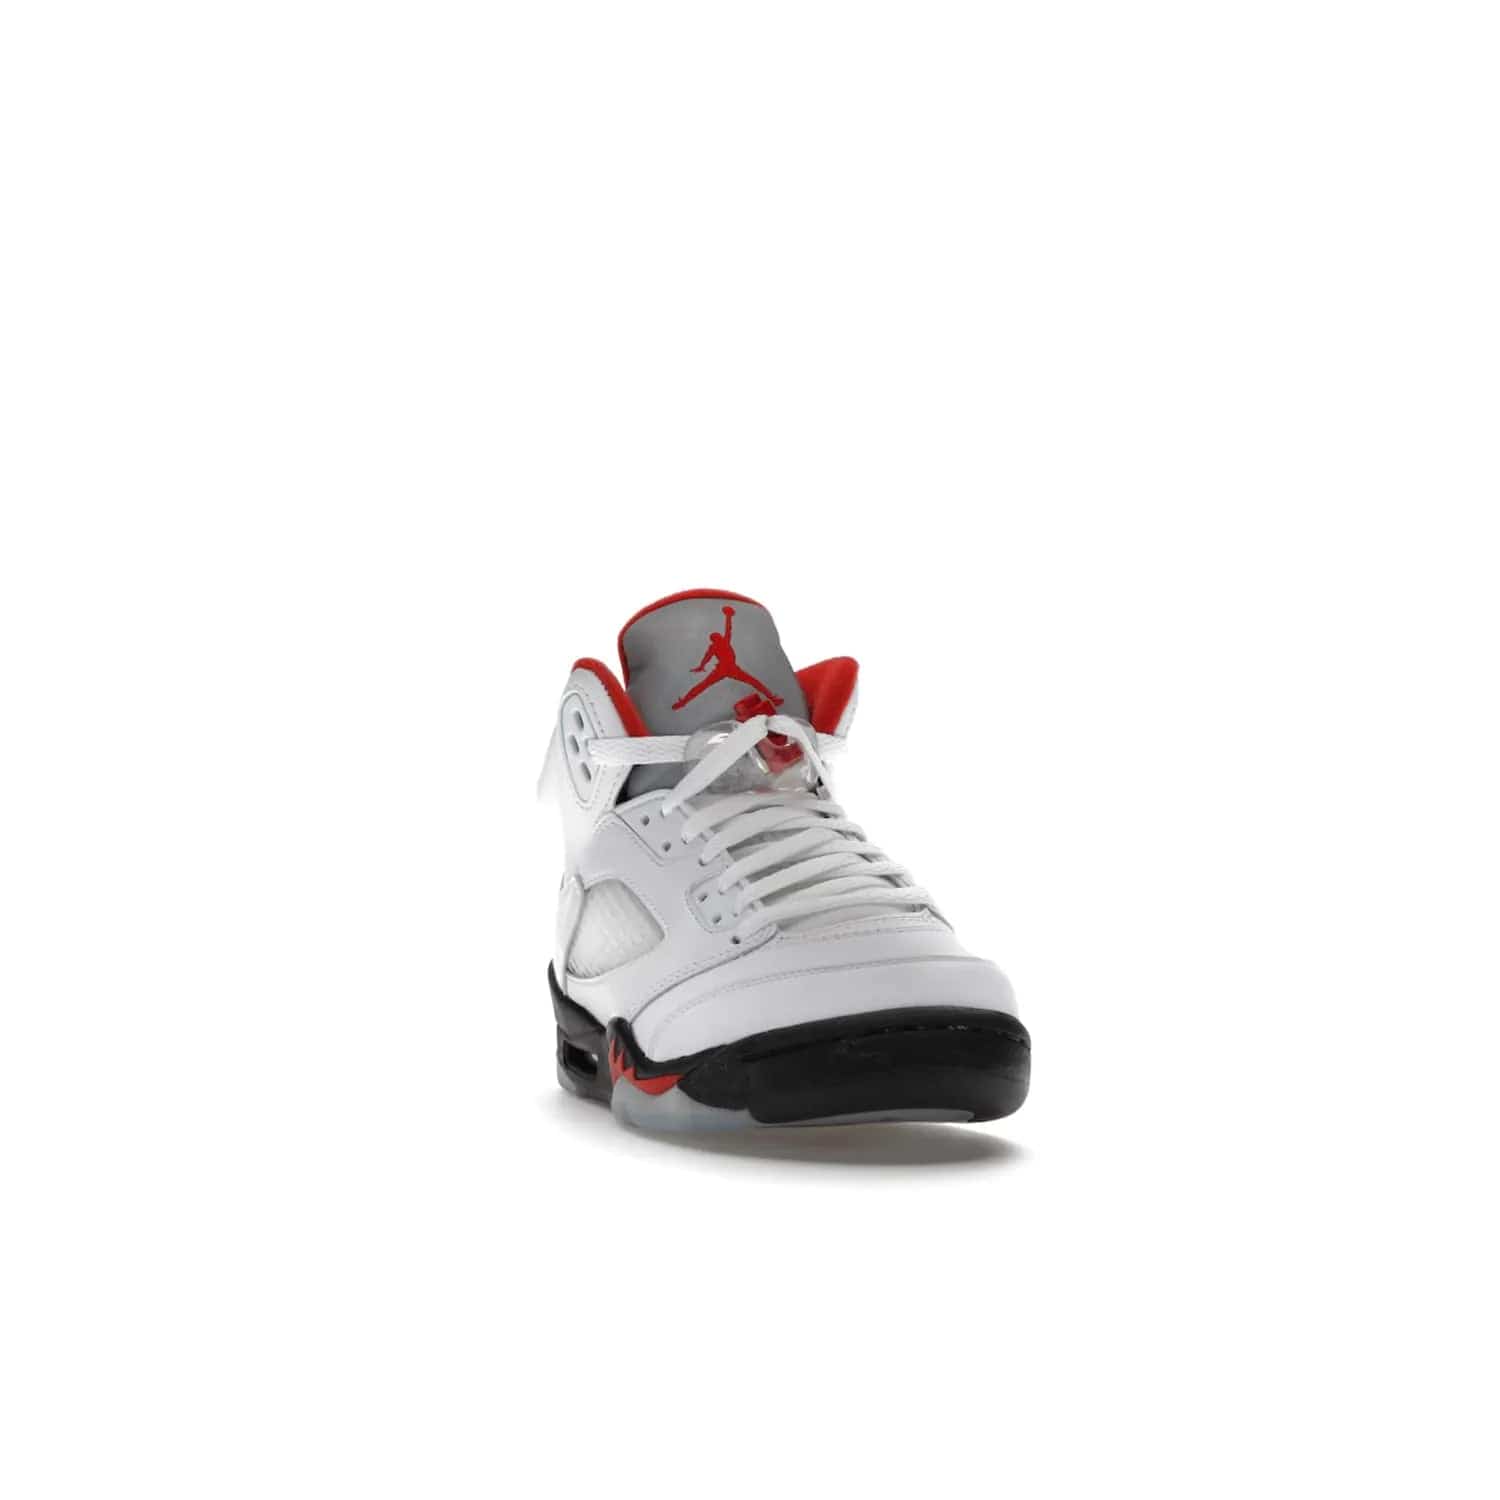 Jordan 5 Retro Fire Red Silver Tongue (2020) (GS) - Image 8 - Only at www.BallersClubKickz.com - A stylish option for any grade schooler. The Air Jordan 5 Retro Fire Red Silver Tongue 2020 GS features a combination of four hues, premium white leather, a clear mesh mid-upper and a reflective silver tongue. An icy translucent blue outsole completes the look. Available on May 2, $150.